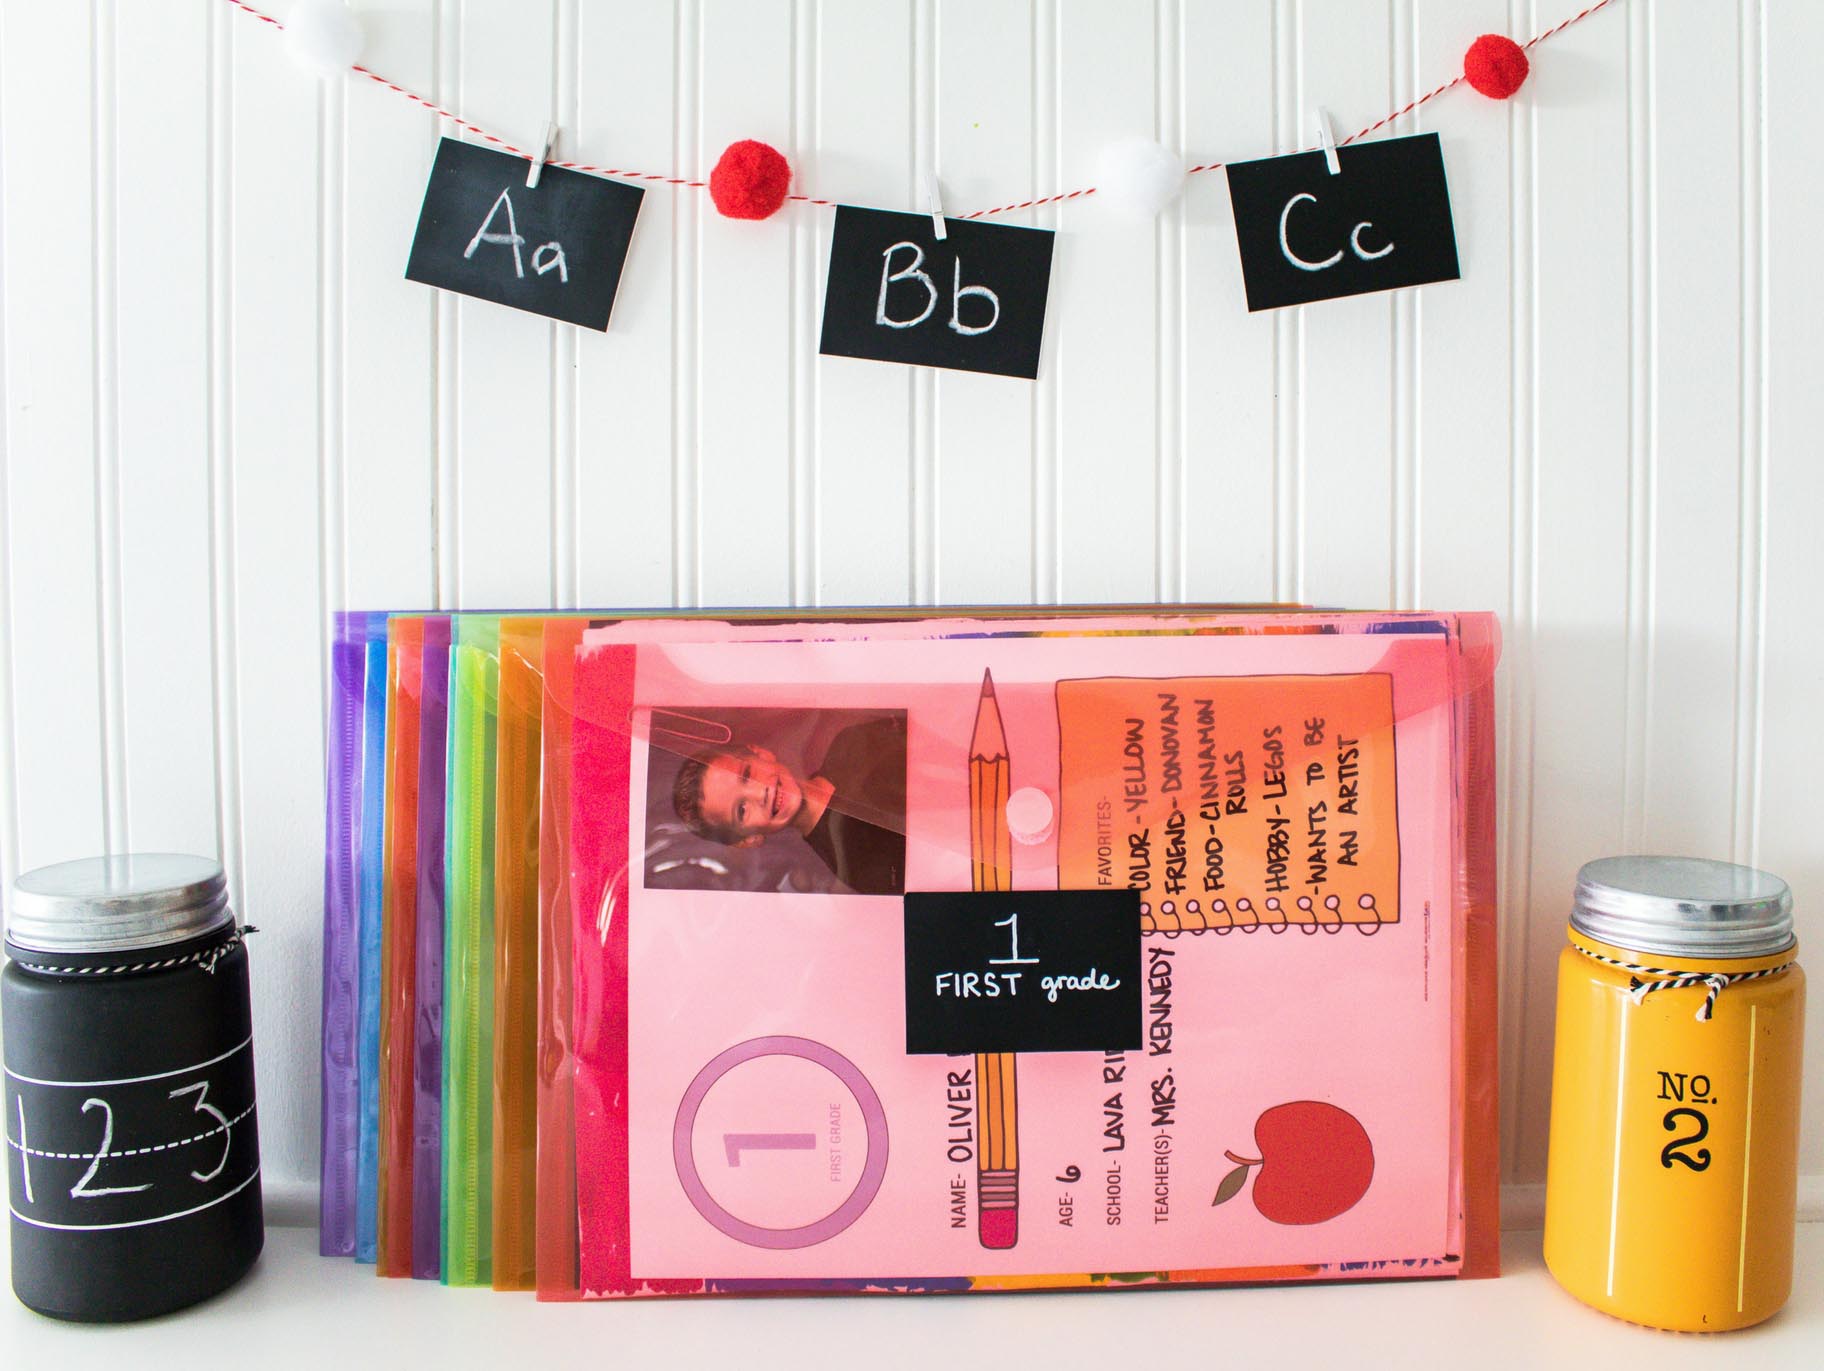 How to Organize Kids School Papers